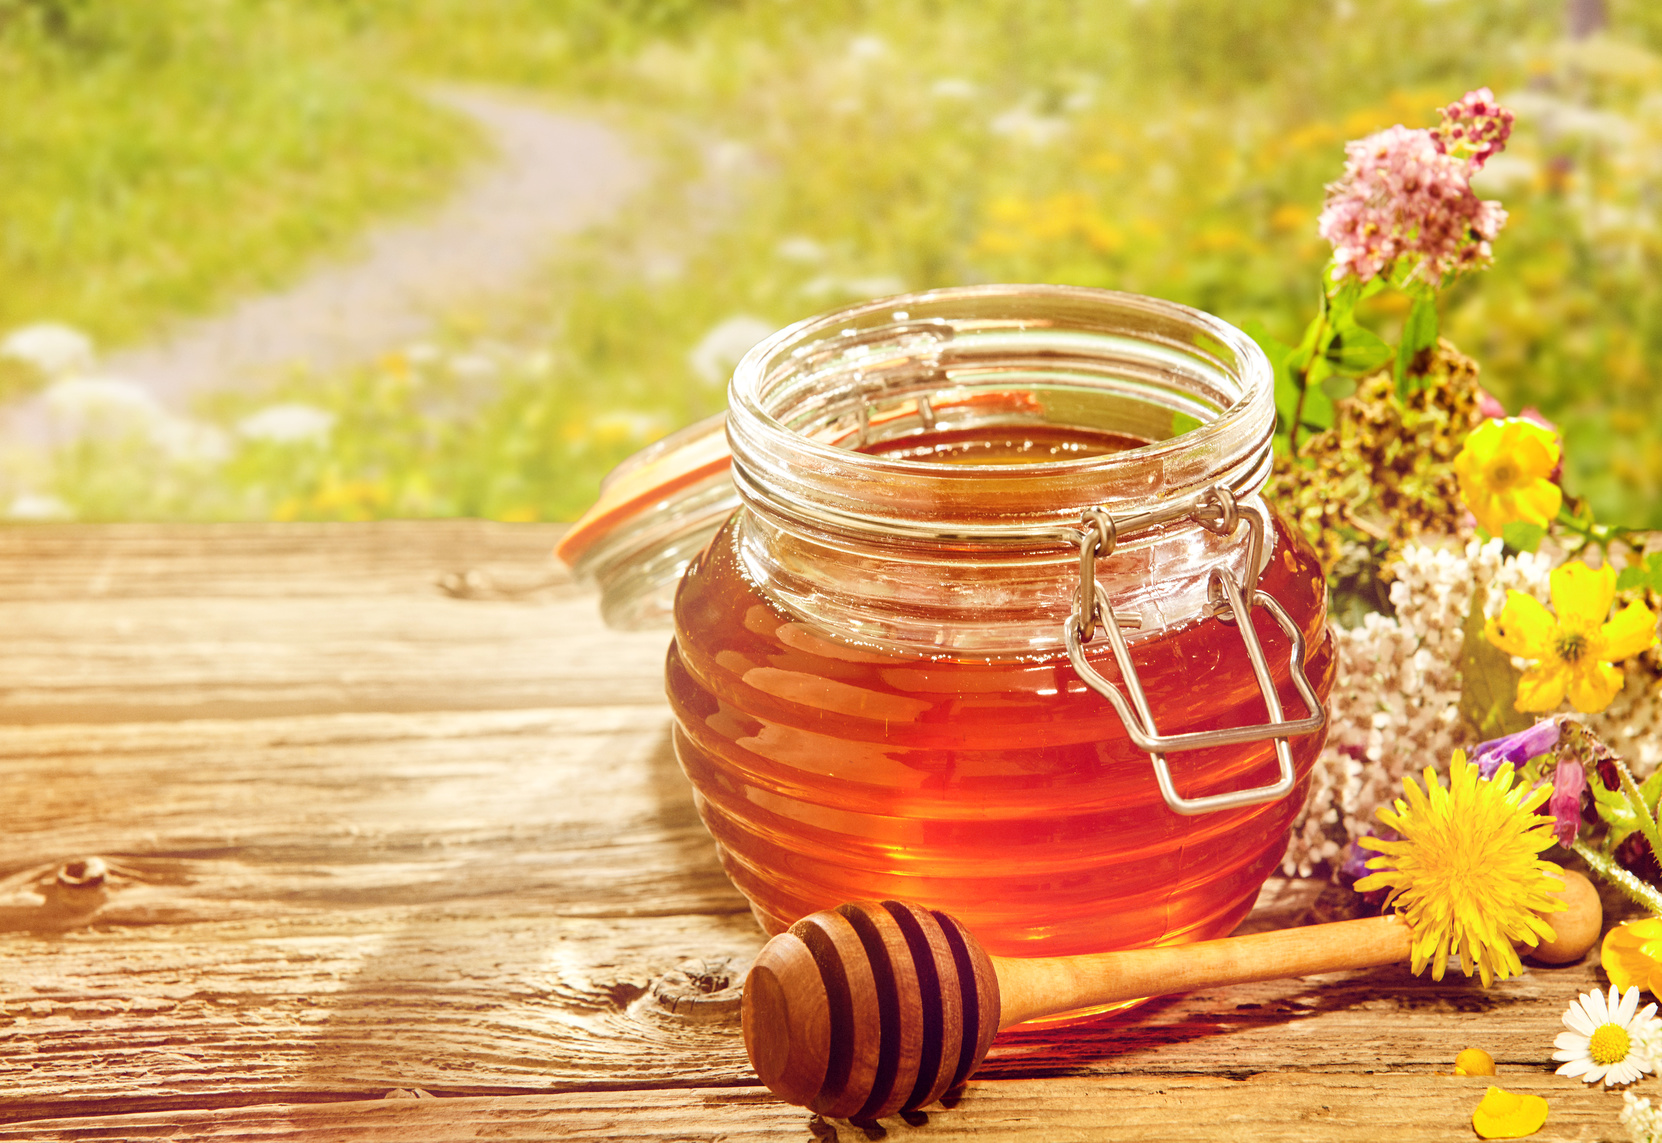 Jar of honey with dipper with flowers